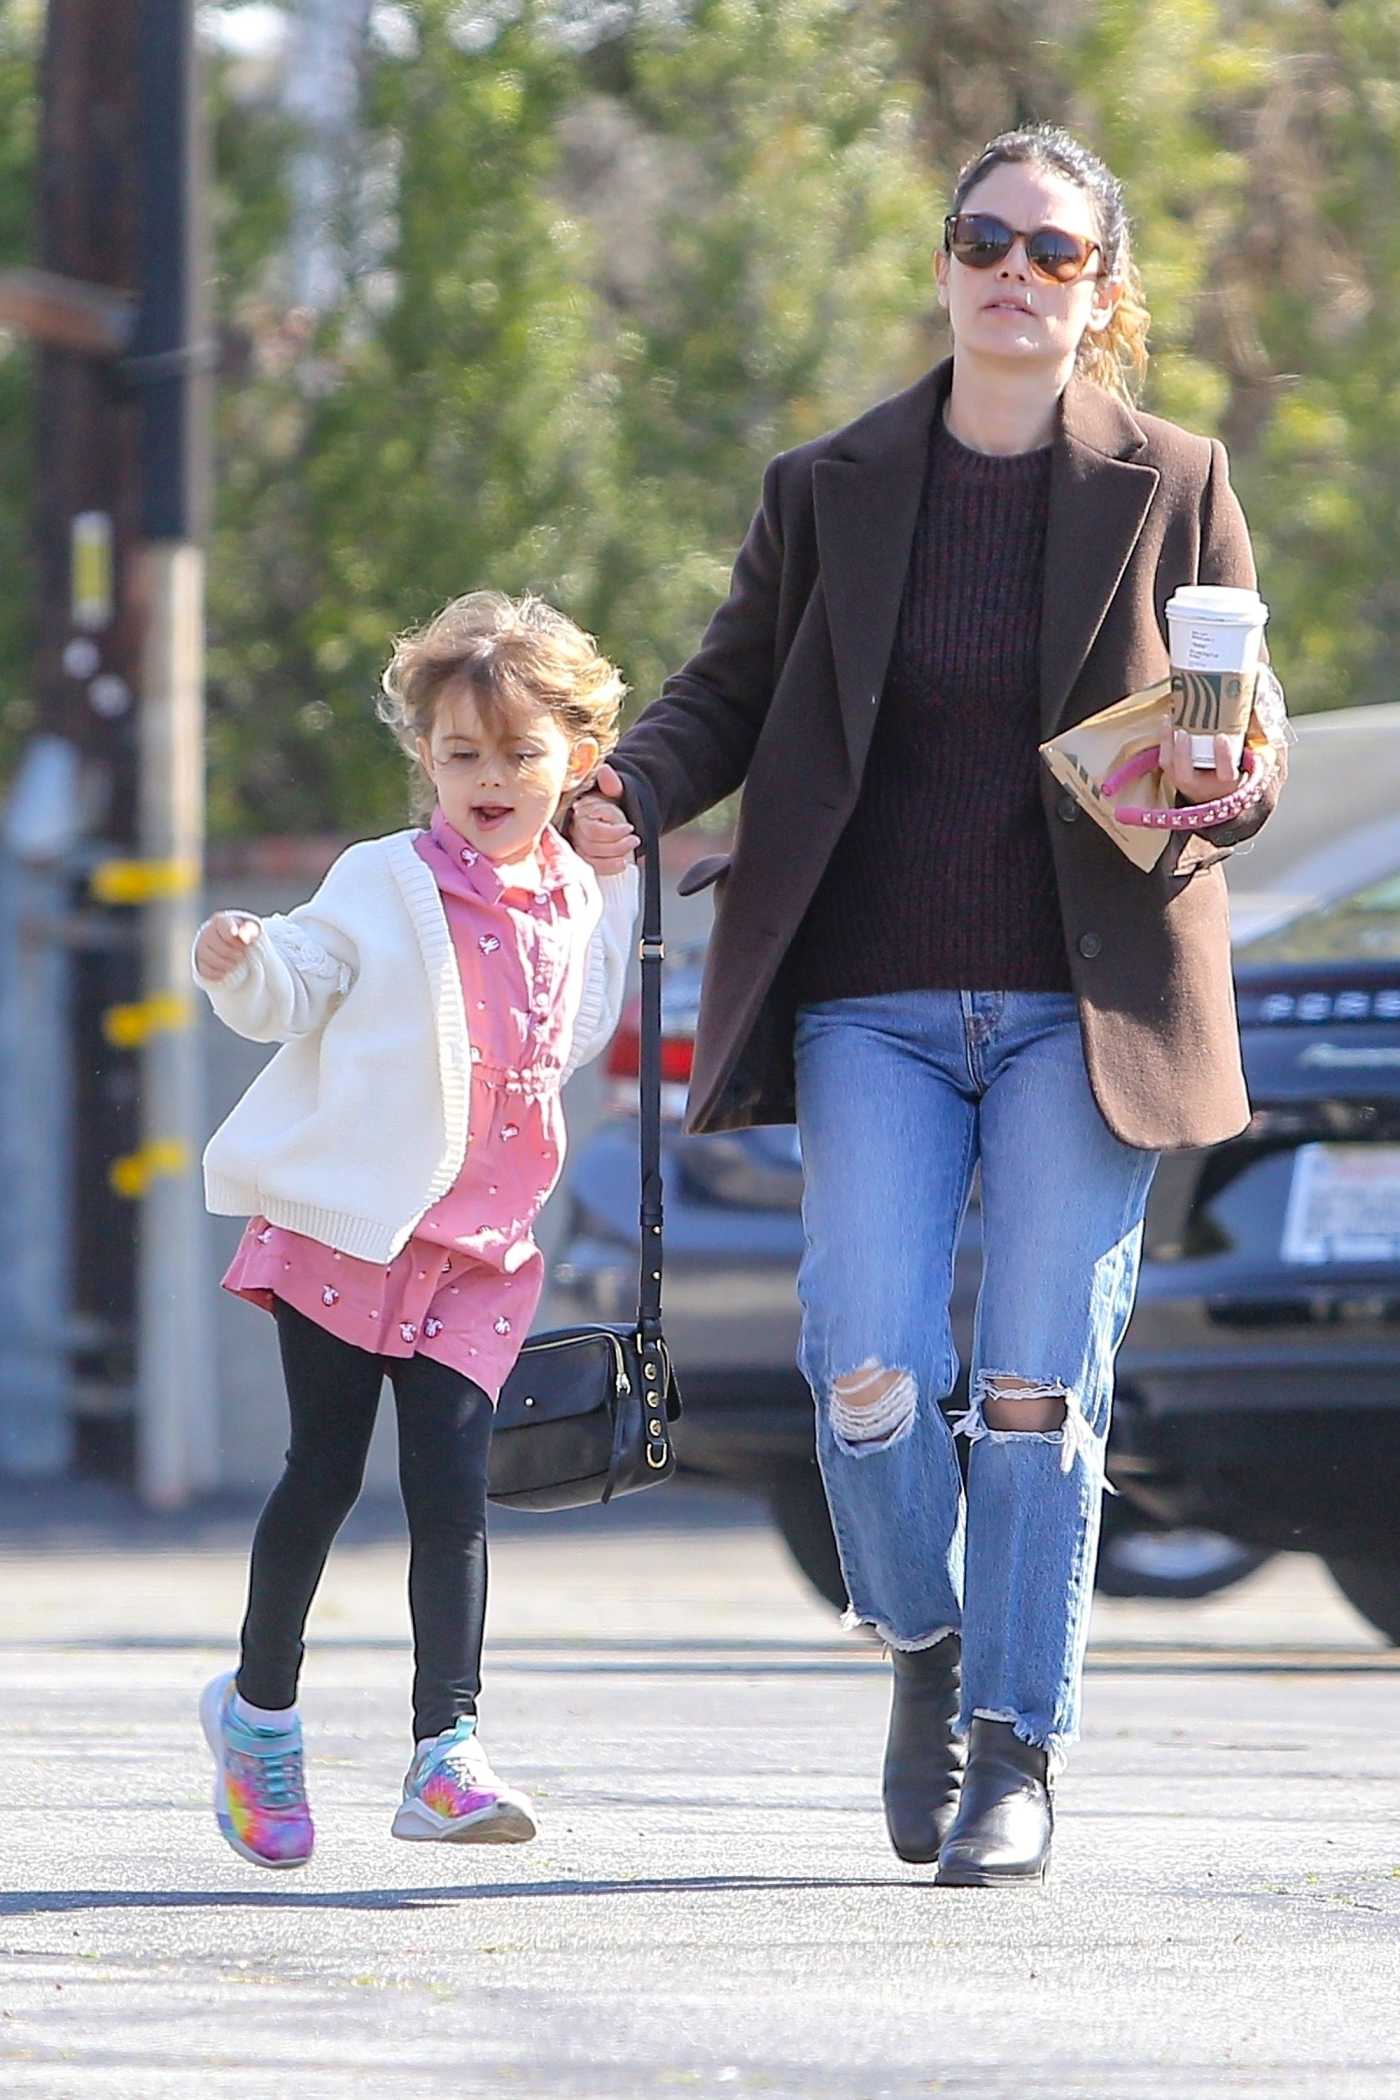 Rachel Bilson in a Blue Ripped Jeans Was Seen Out with Her Daughter in Pasadena 02/14/2020